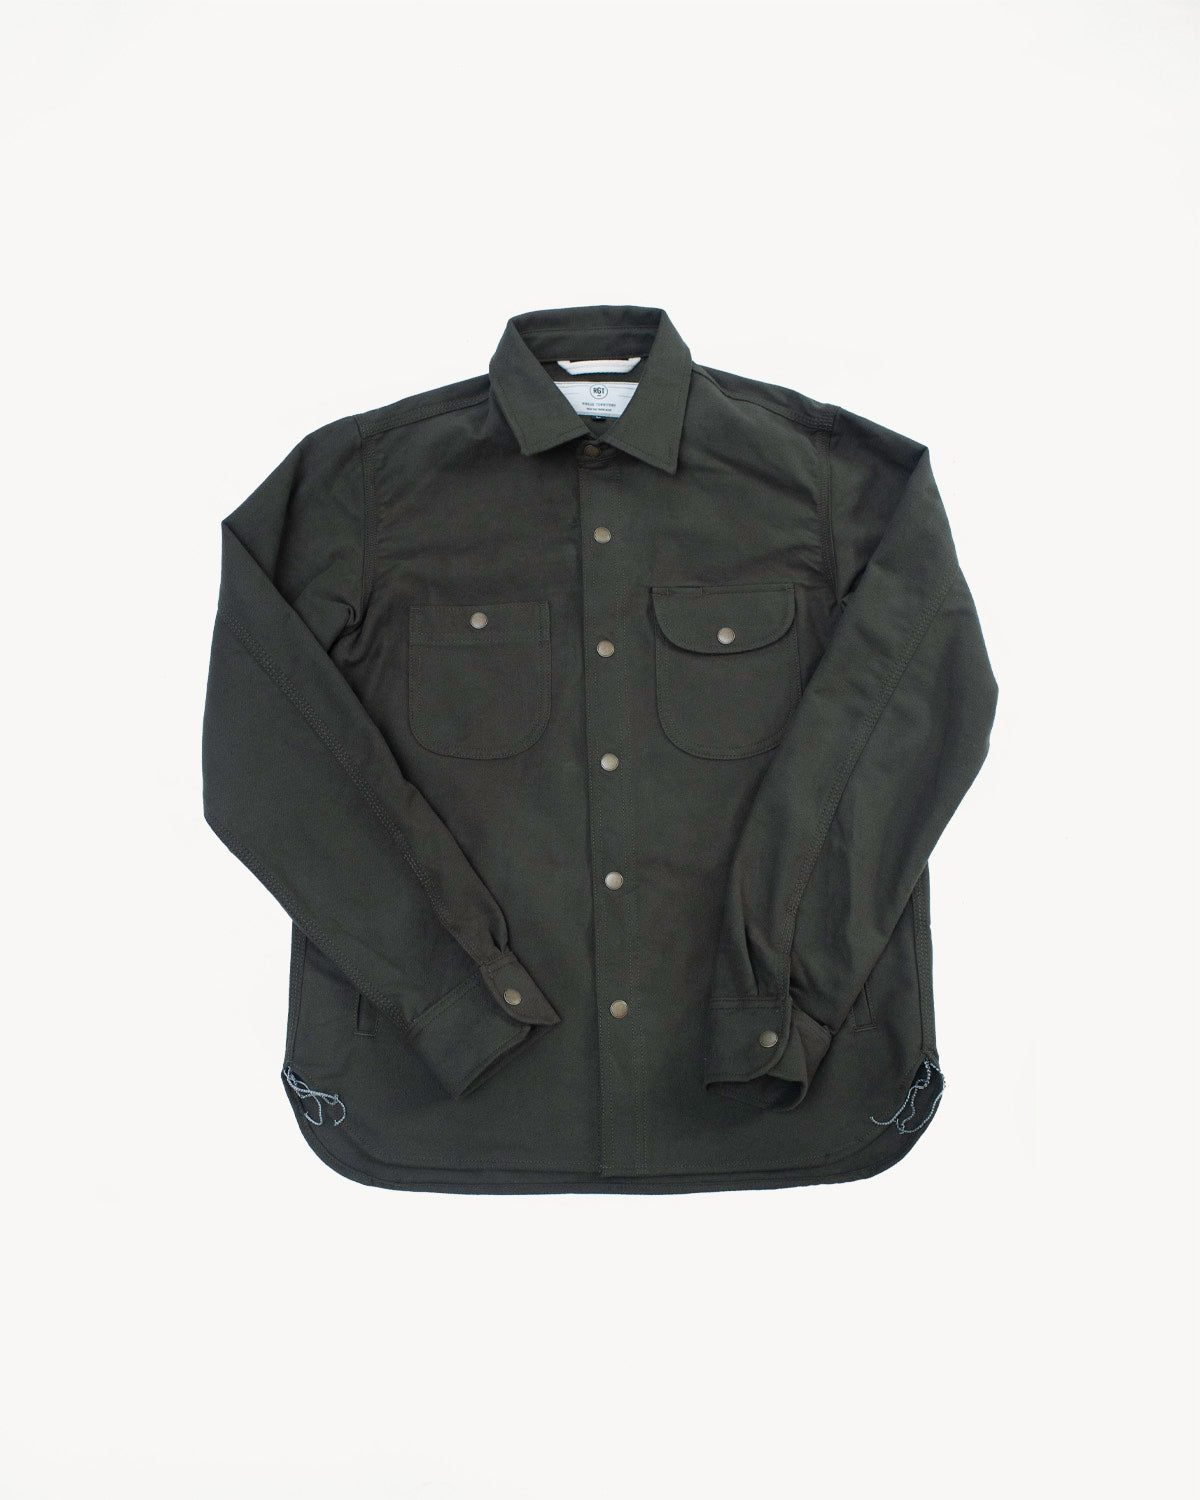 Service Shirt Copper Flannel - Rogue Territory